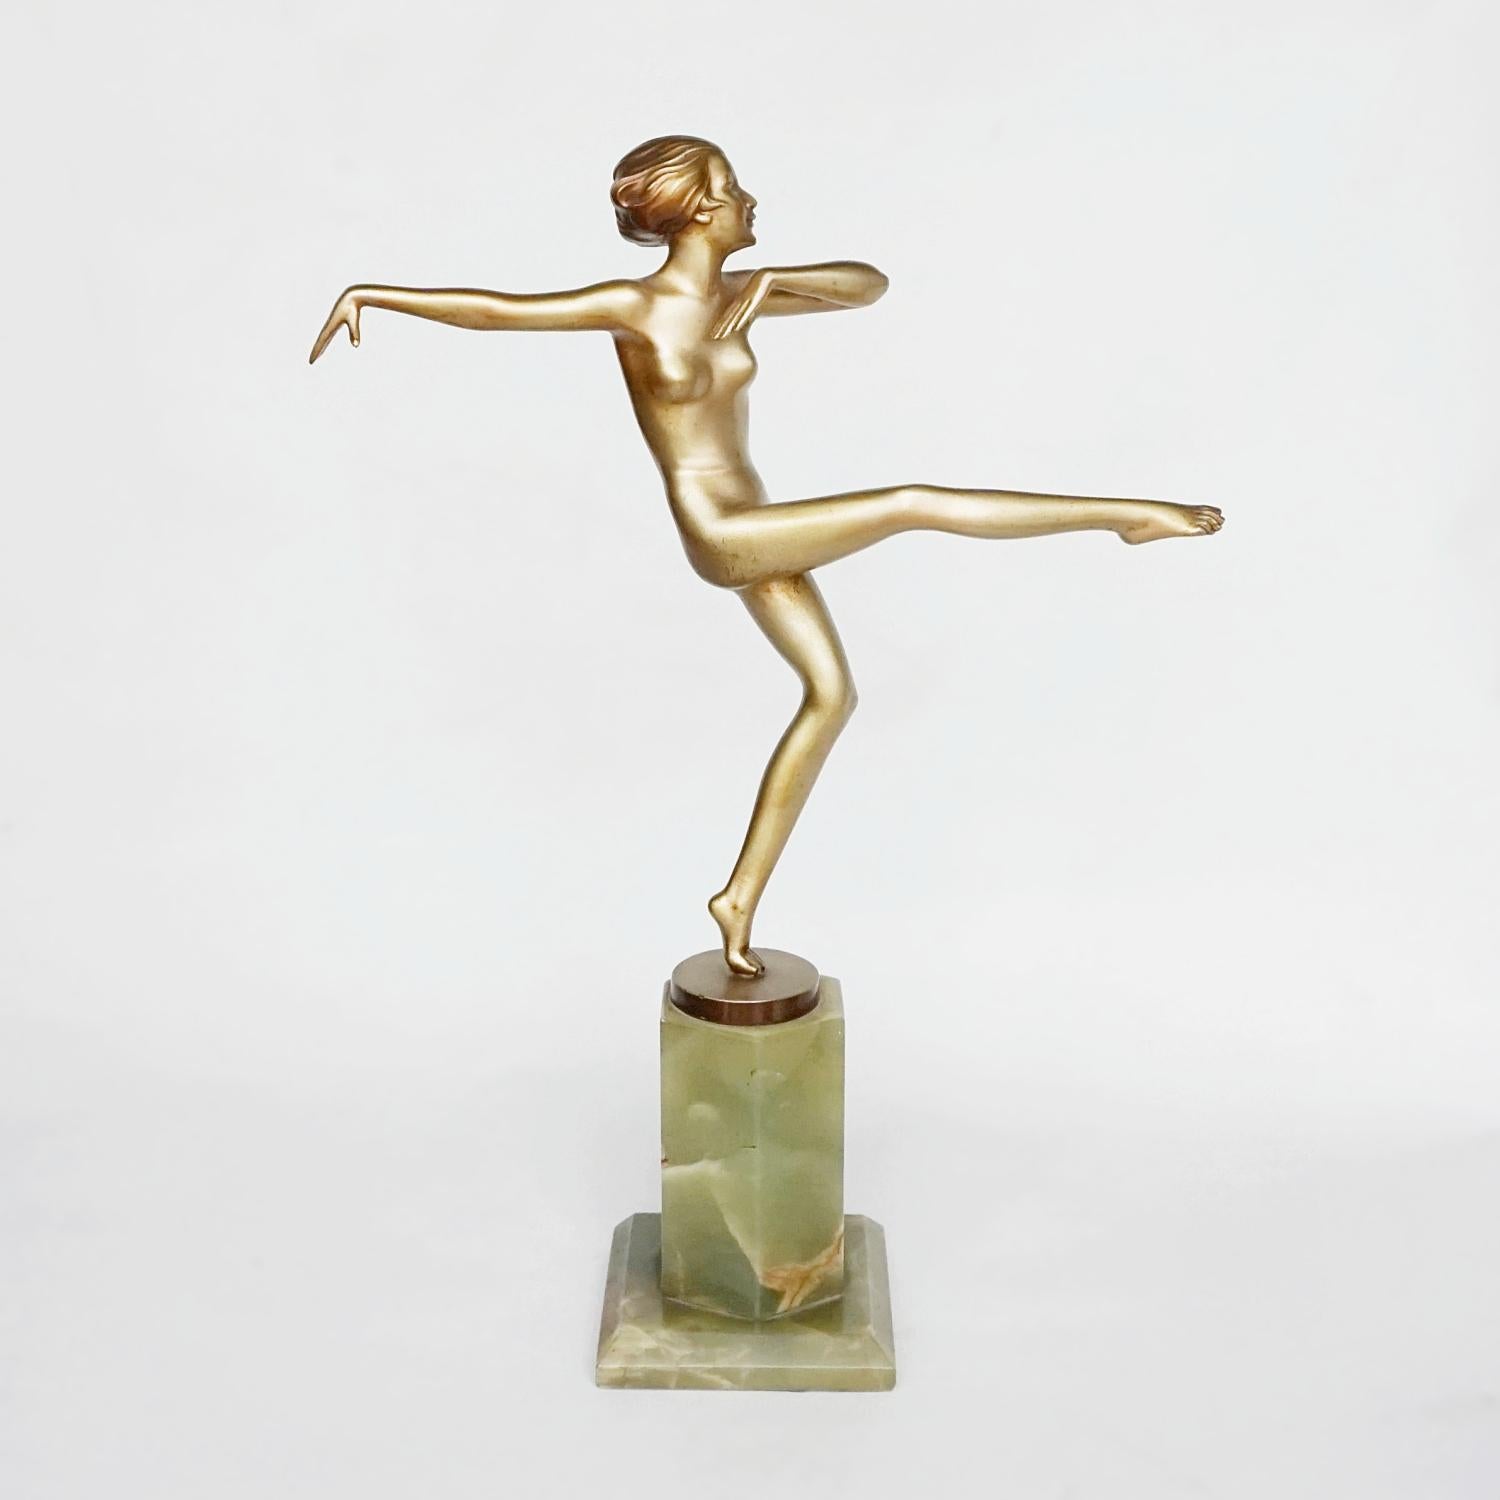 'High Kick' an Art Deco cold painted bronze sculpture by Josef Lorenzl. Set over an original onyx base, the sculpture shows an elegant lady in motion with her arms and leg outstretched. 

Fine orignal condition, wear consistent with age and use.